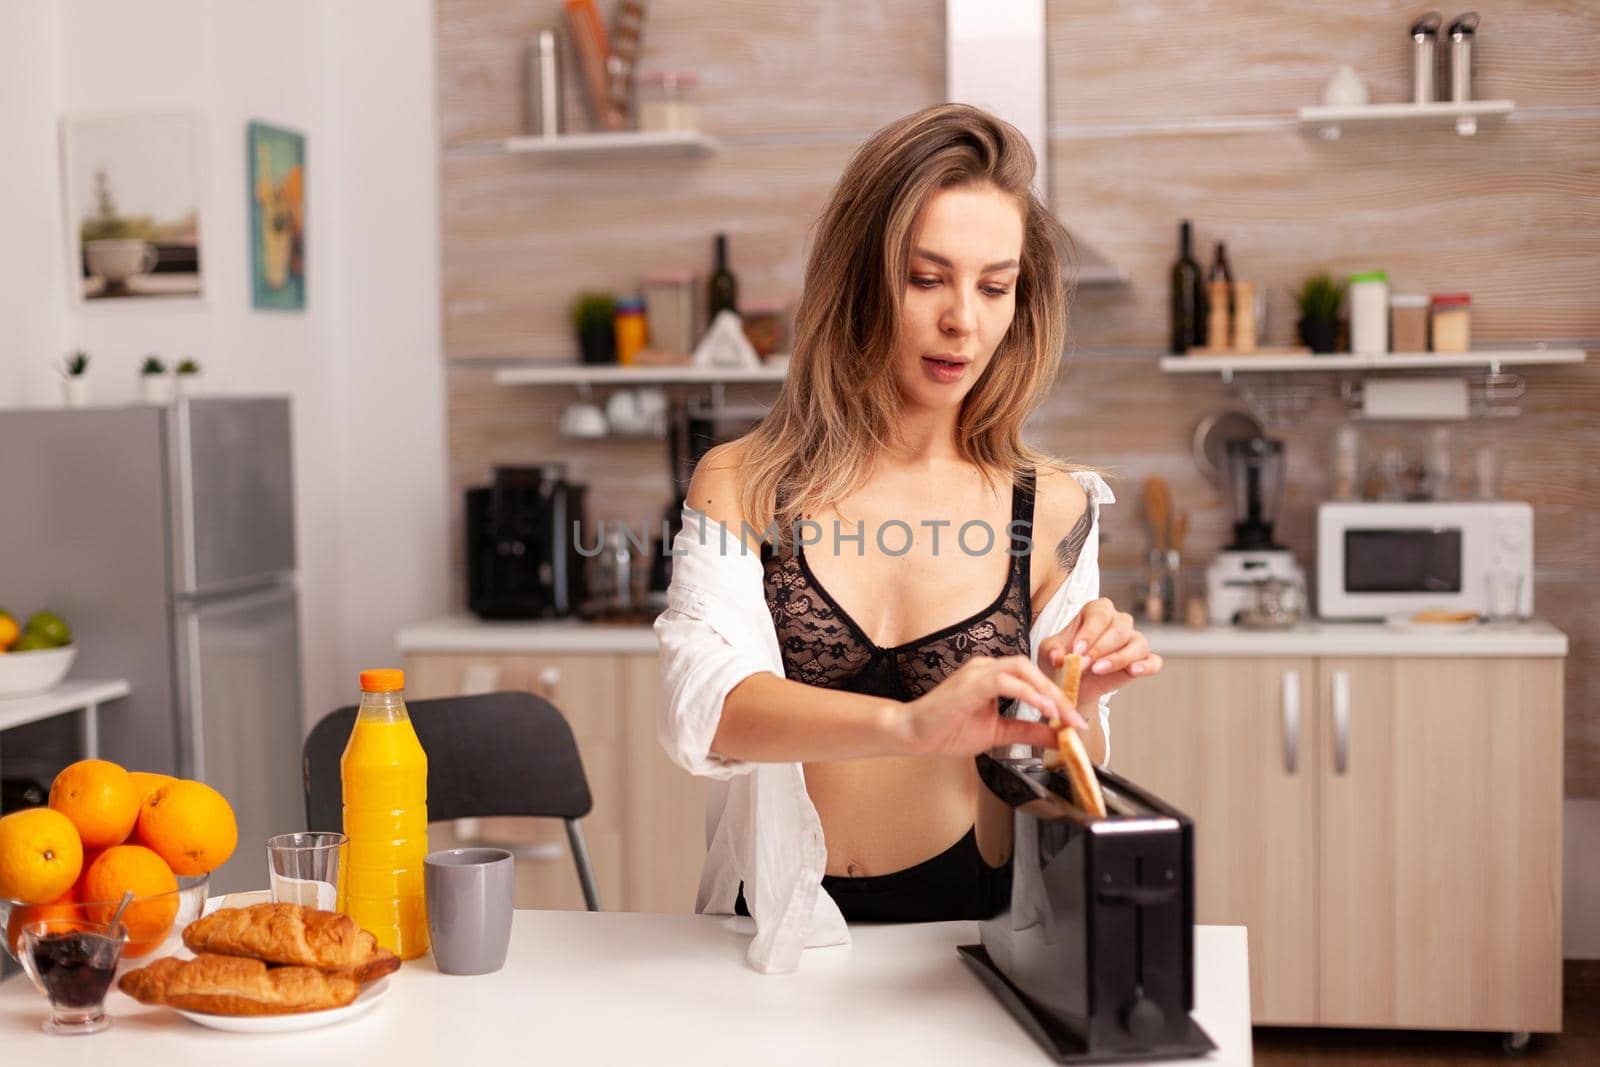 Sexy woman preparing roasted bread in home kitchen in lingerie. Young sexy seductive blode lady with tattoos drinking healthy, natural homemade orange juice, refreshing sunday morning.